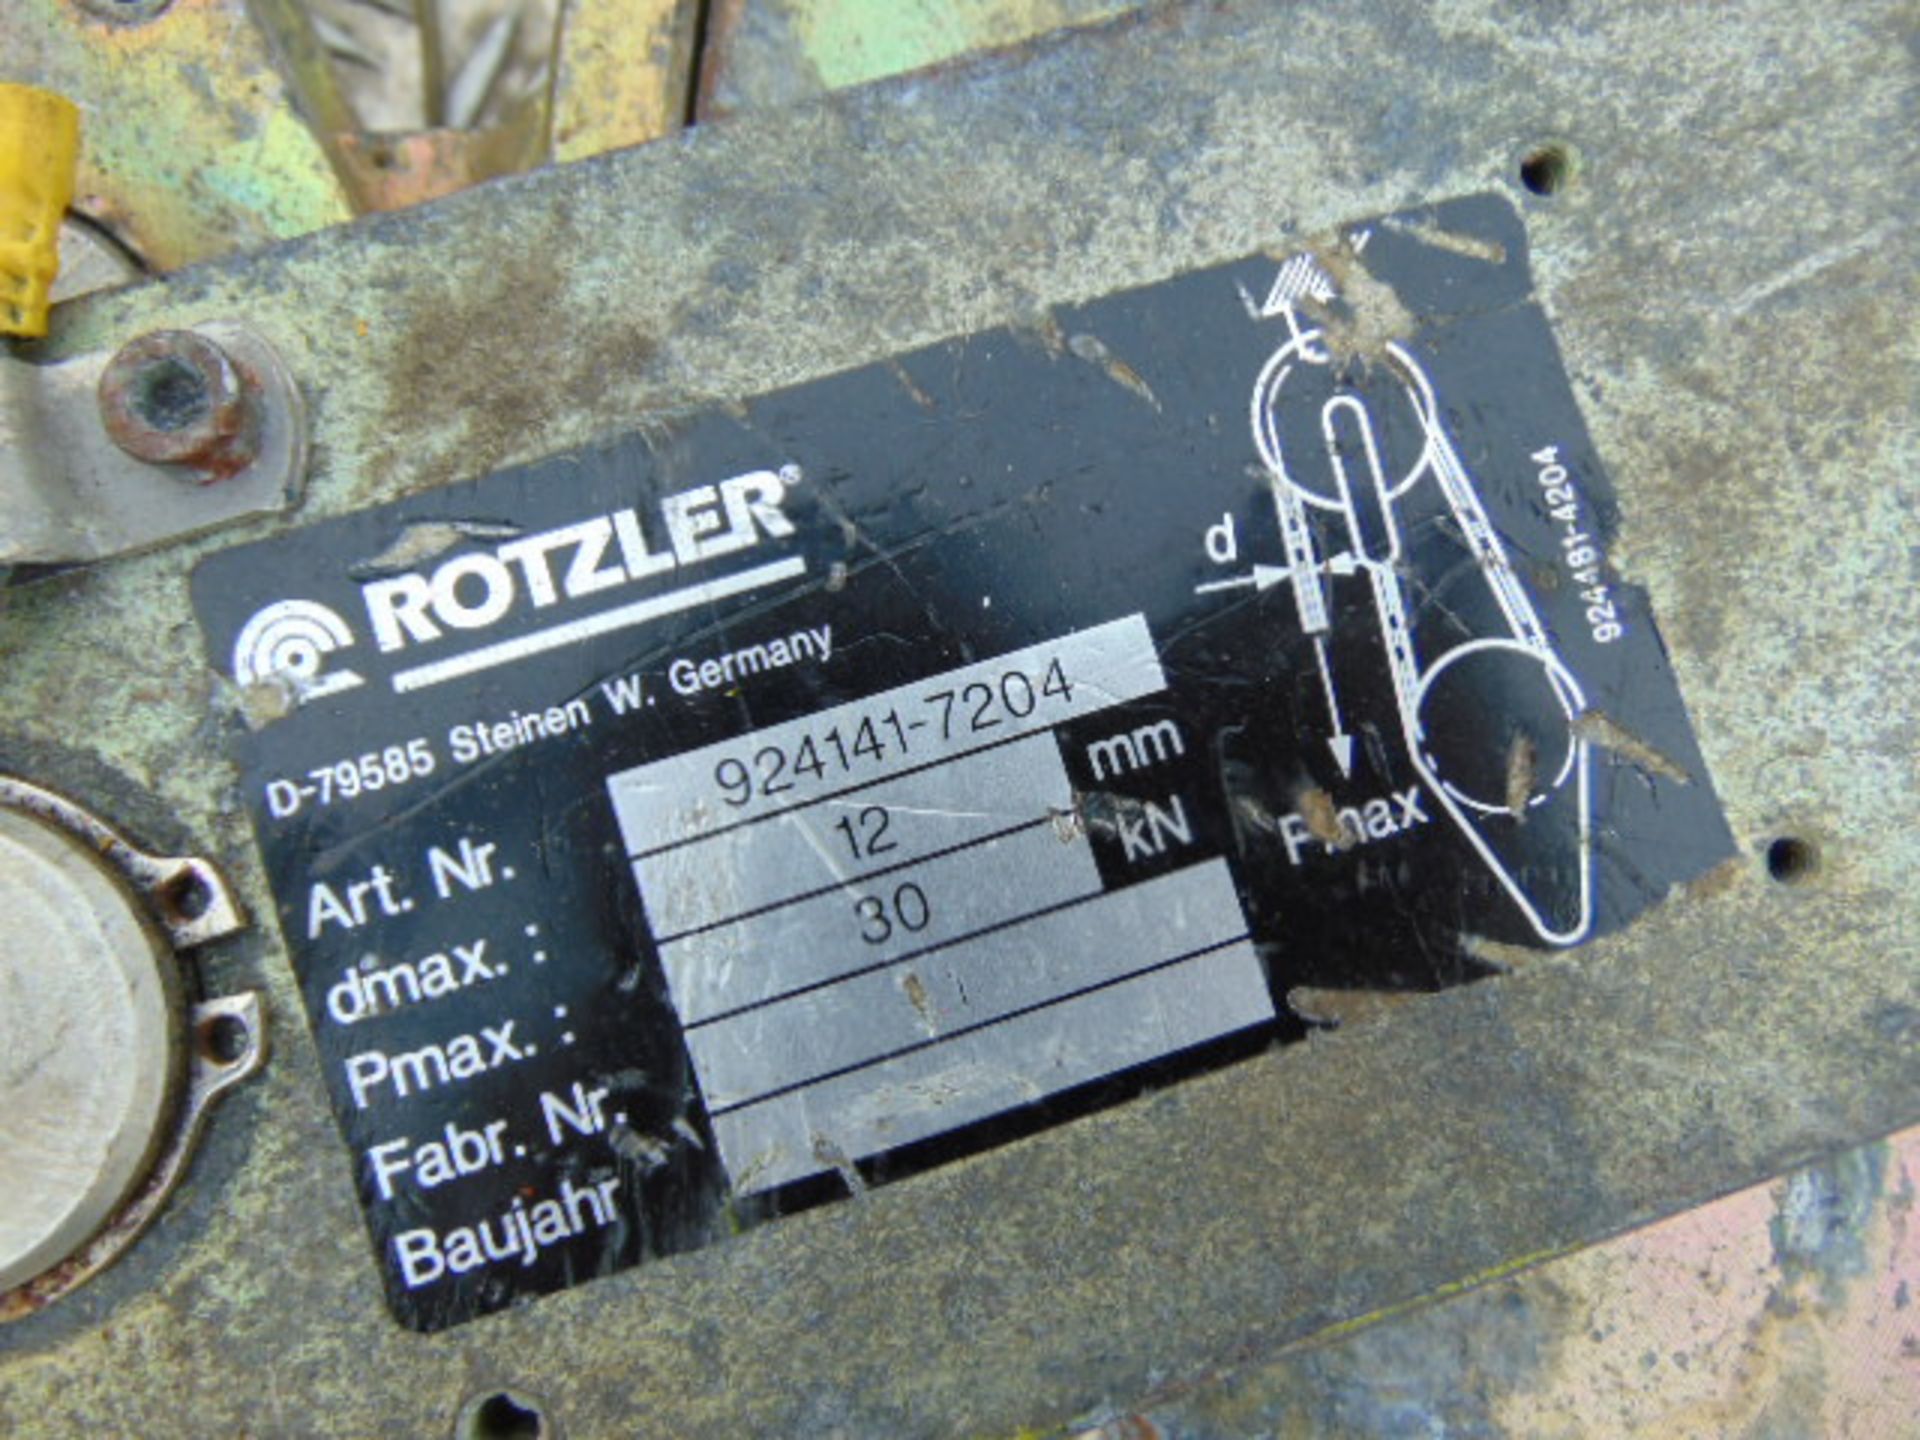 Rotzler 12mm 30kN Pulley Block - Image 2 of 3